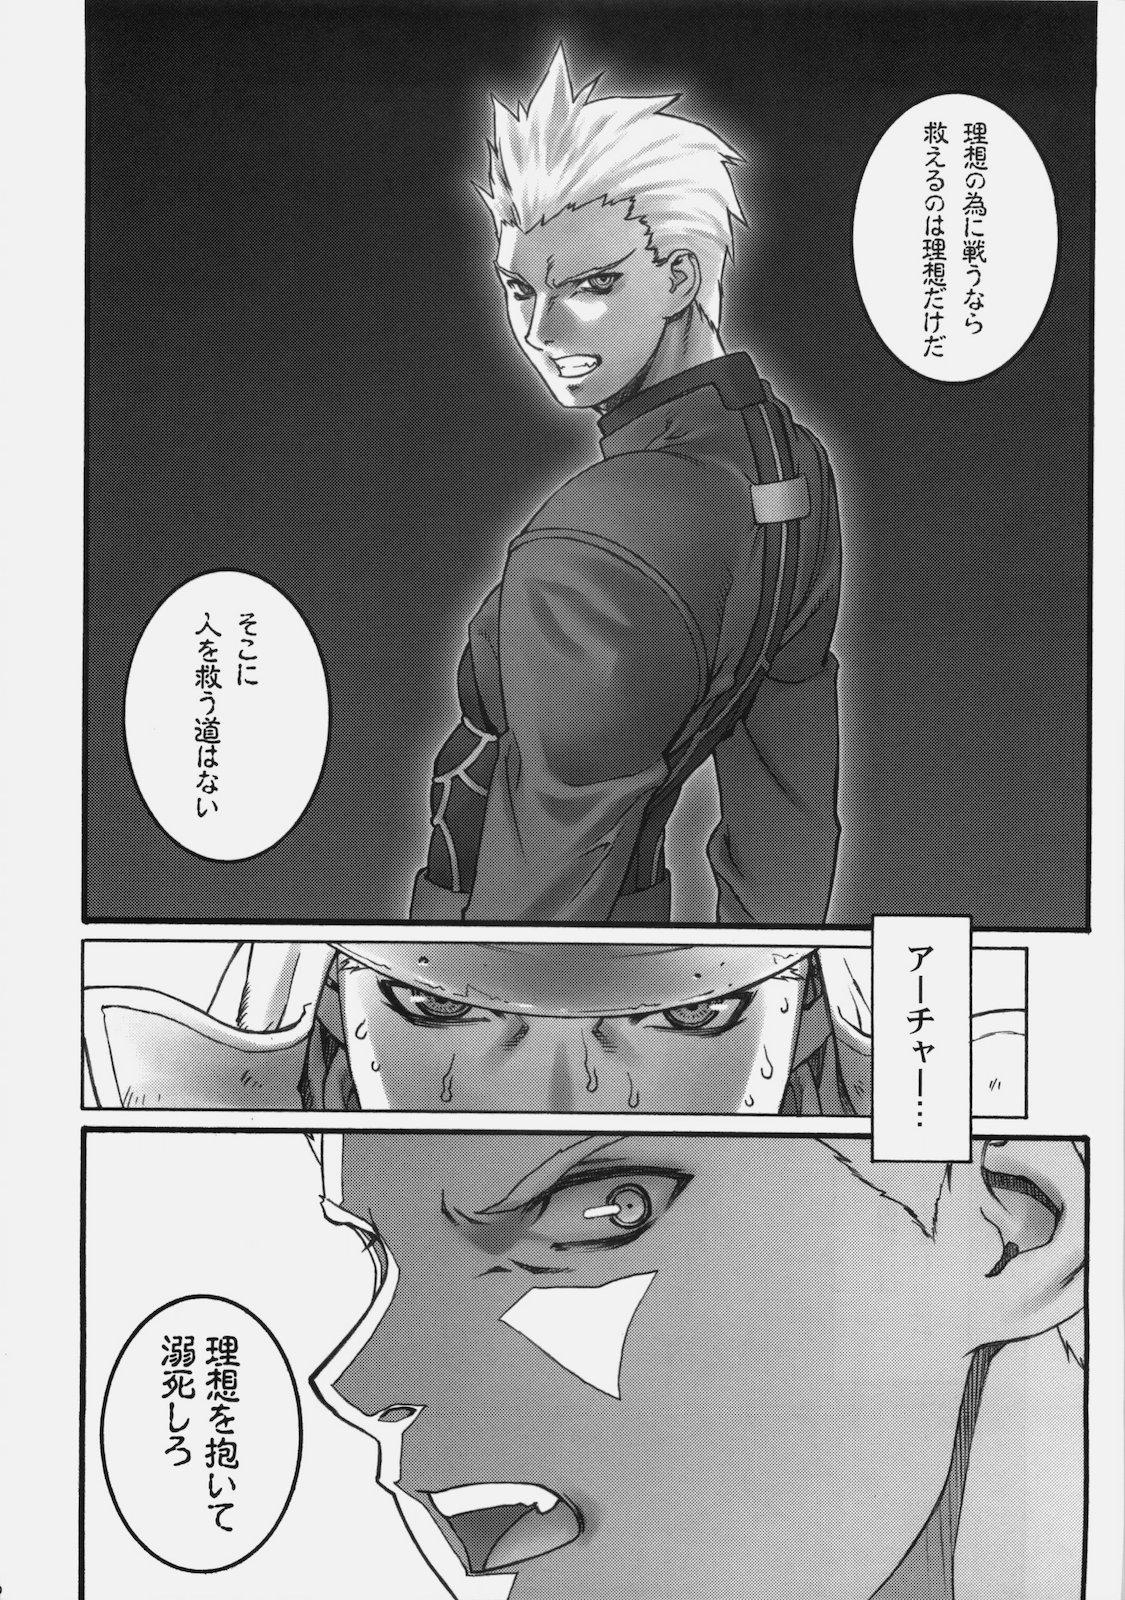 Orgame Theater of Fate - Fate stay night Korea - Page 11